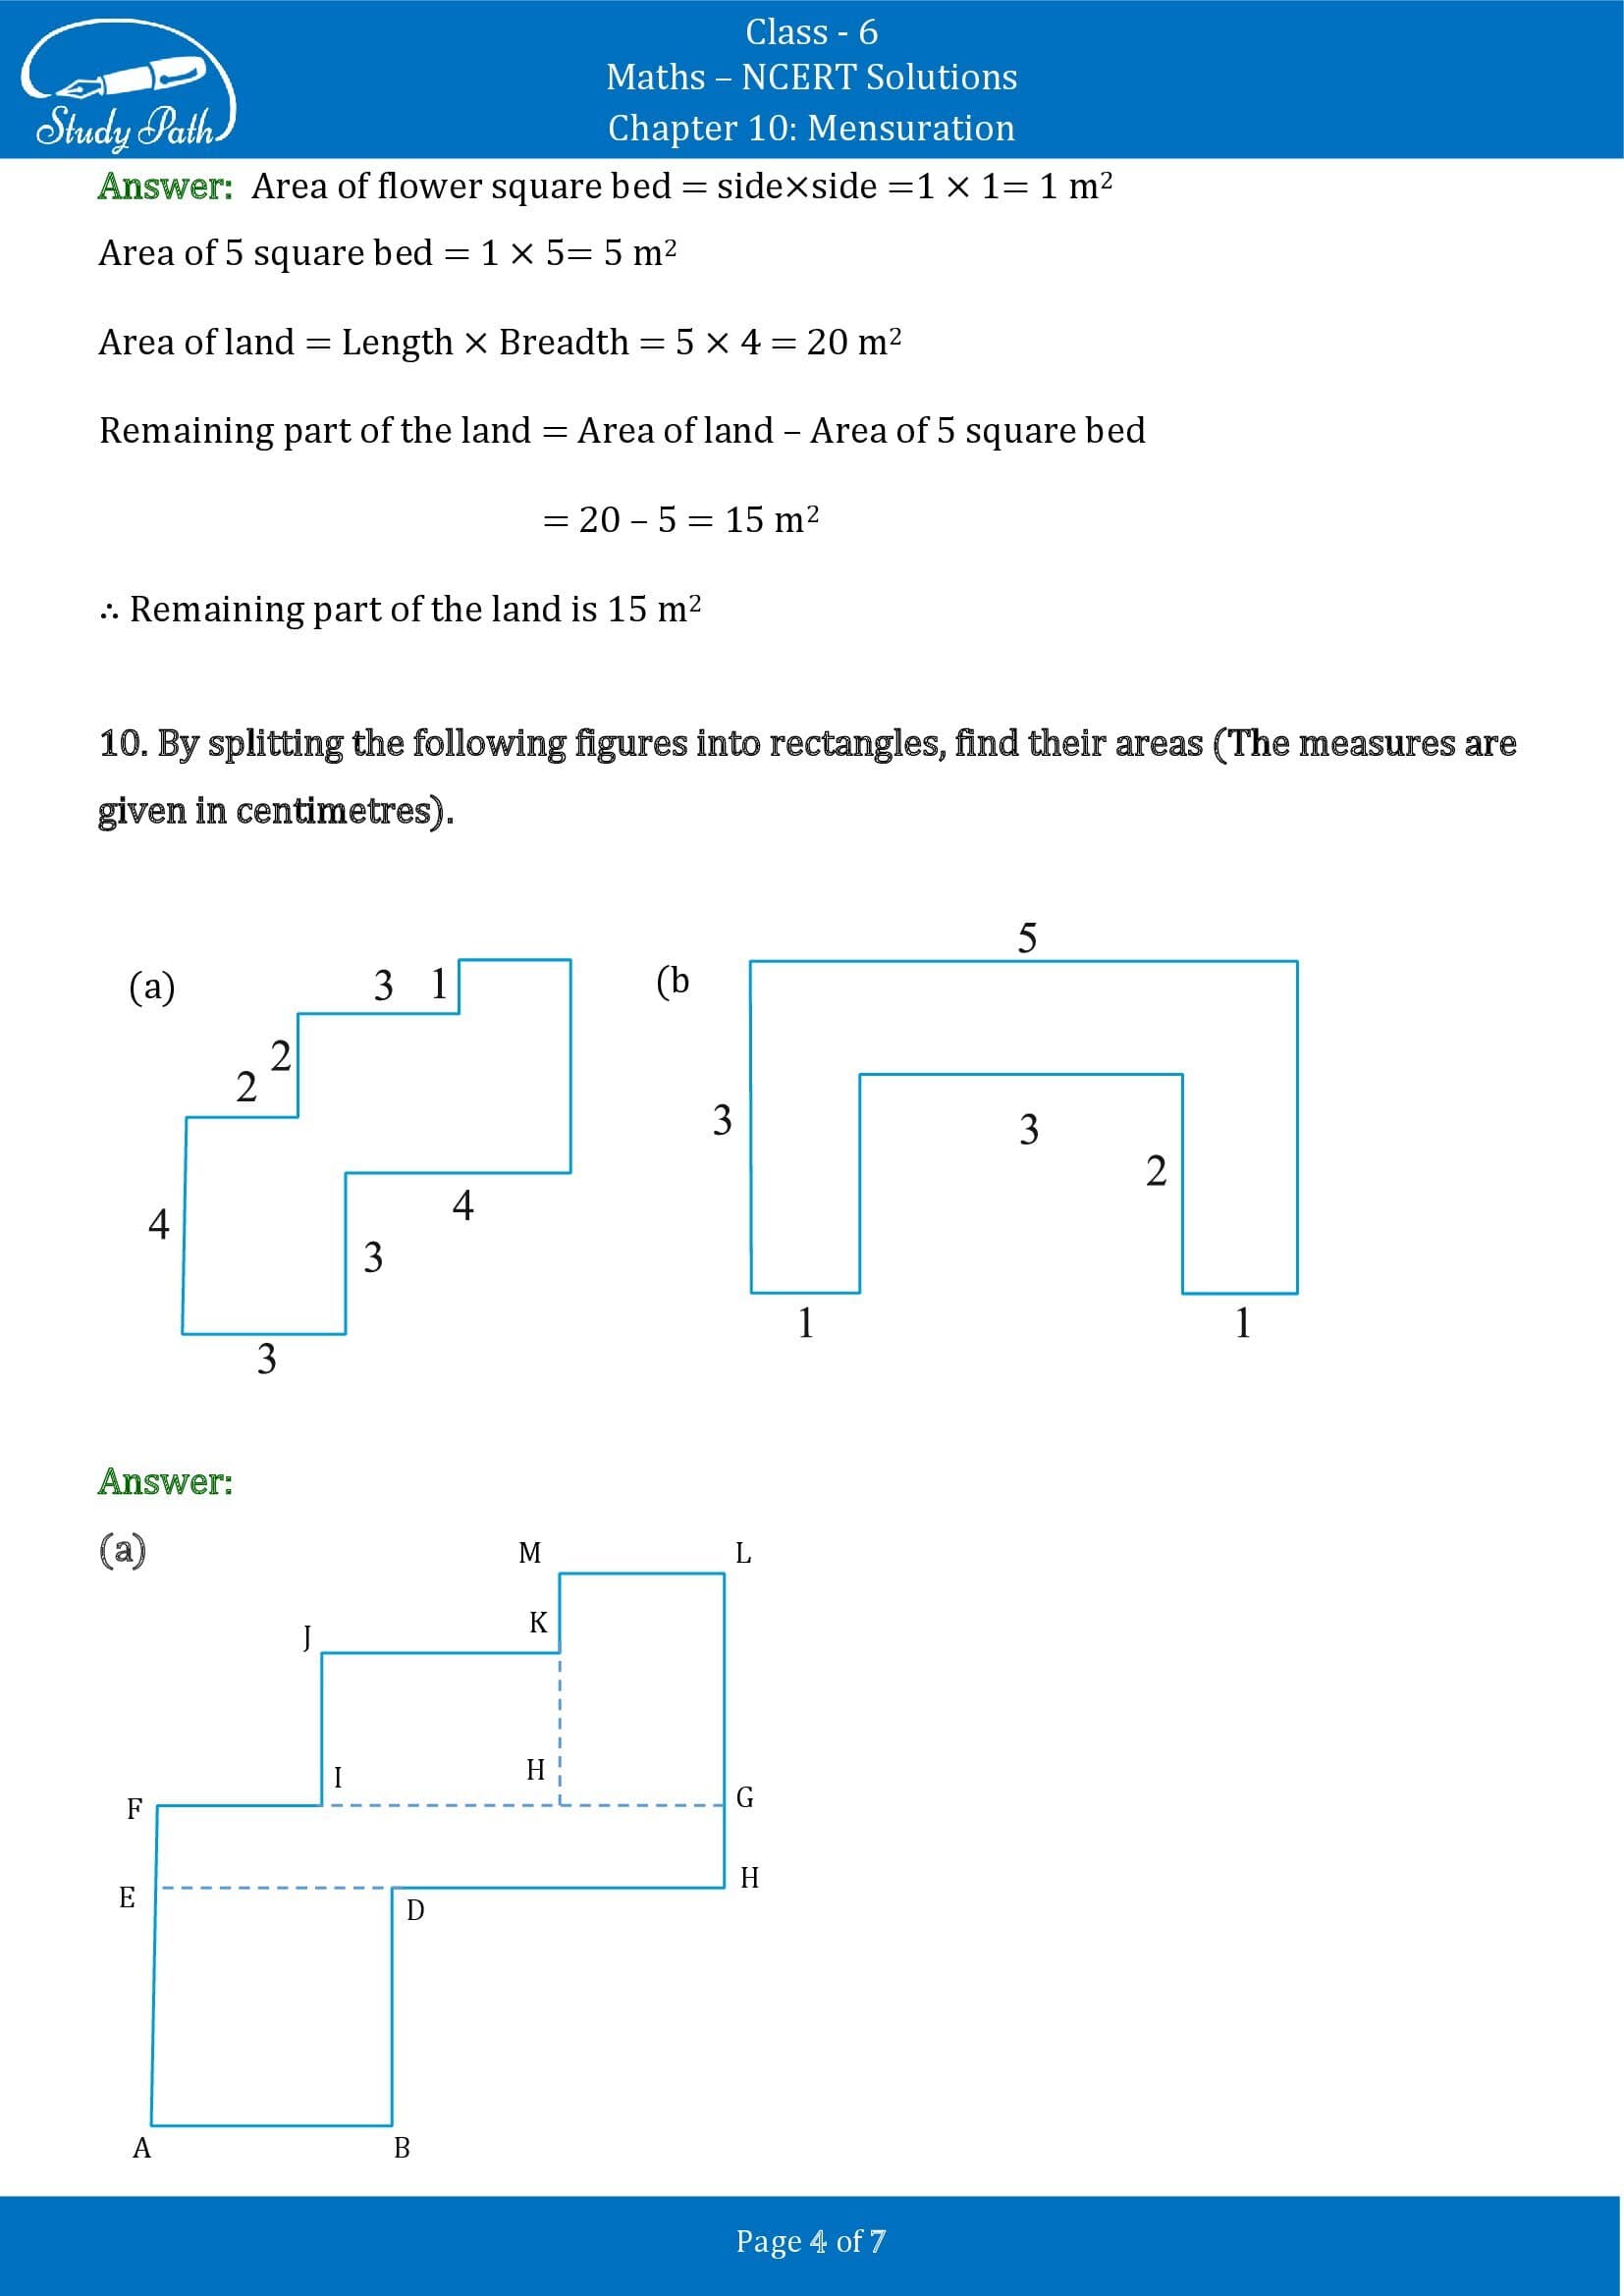 NCERT Solutions for Class 6 Maths Chapter 10 Mensuration Exercise 10.3 00004